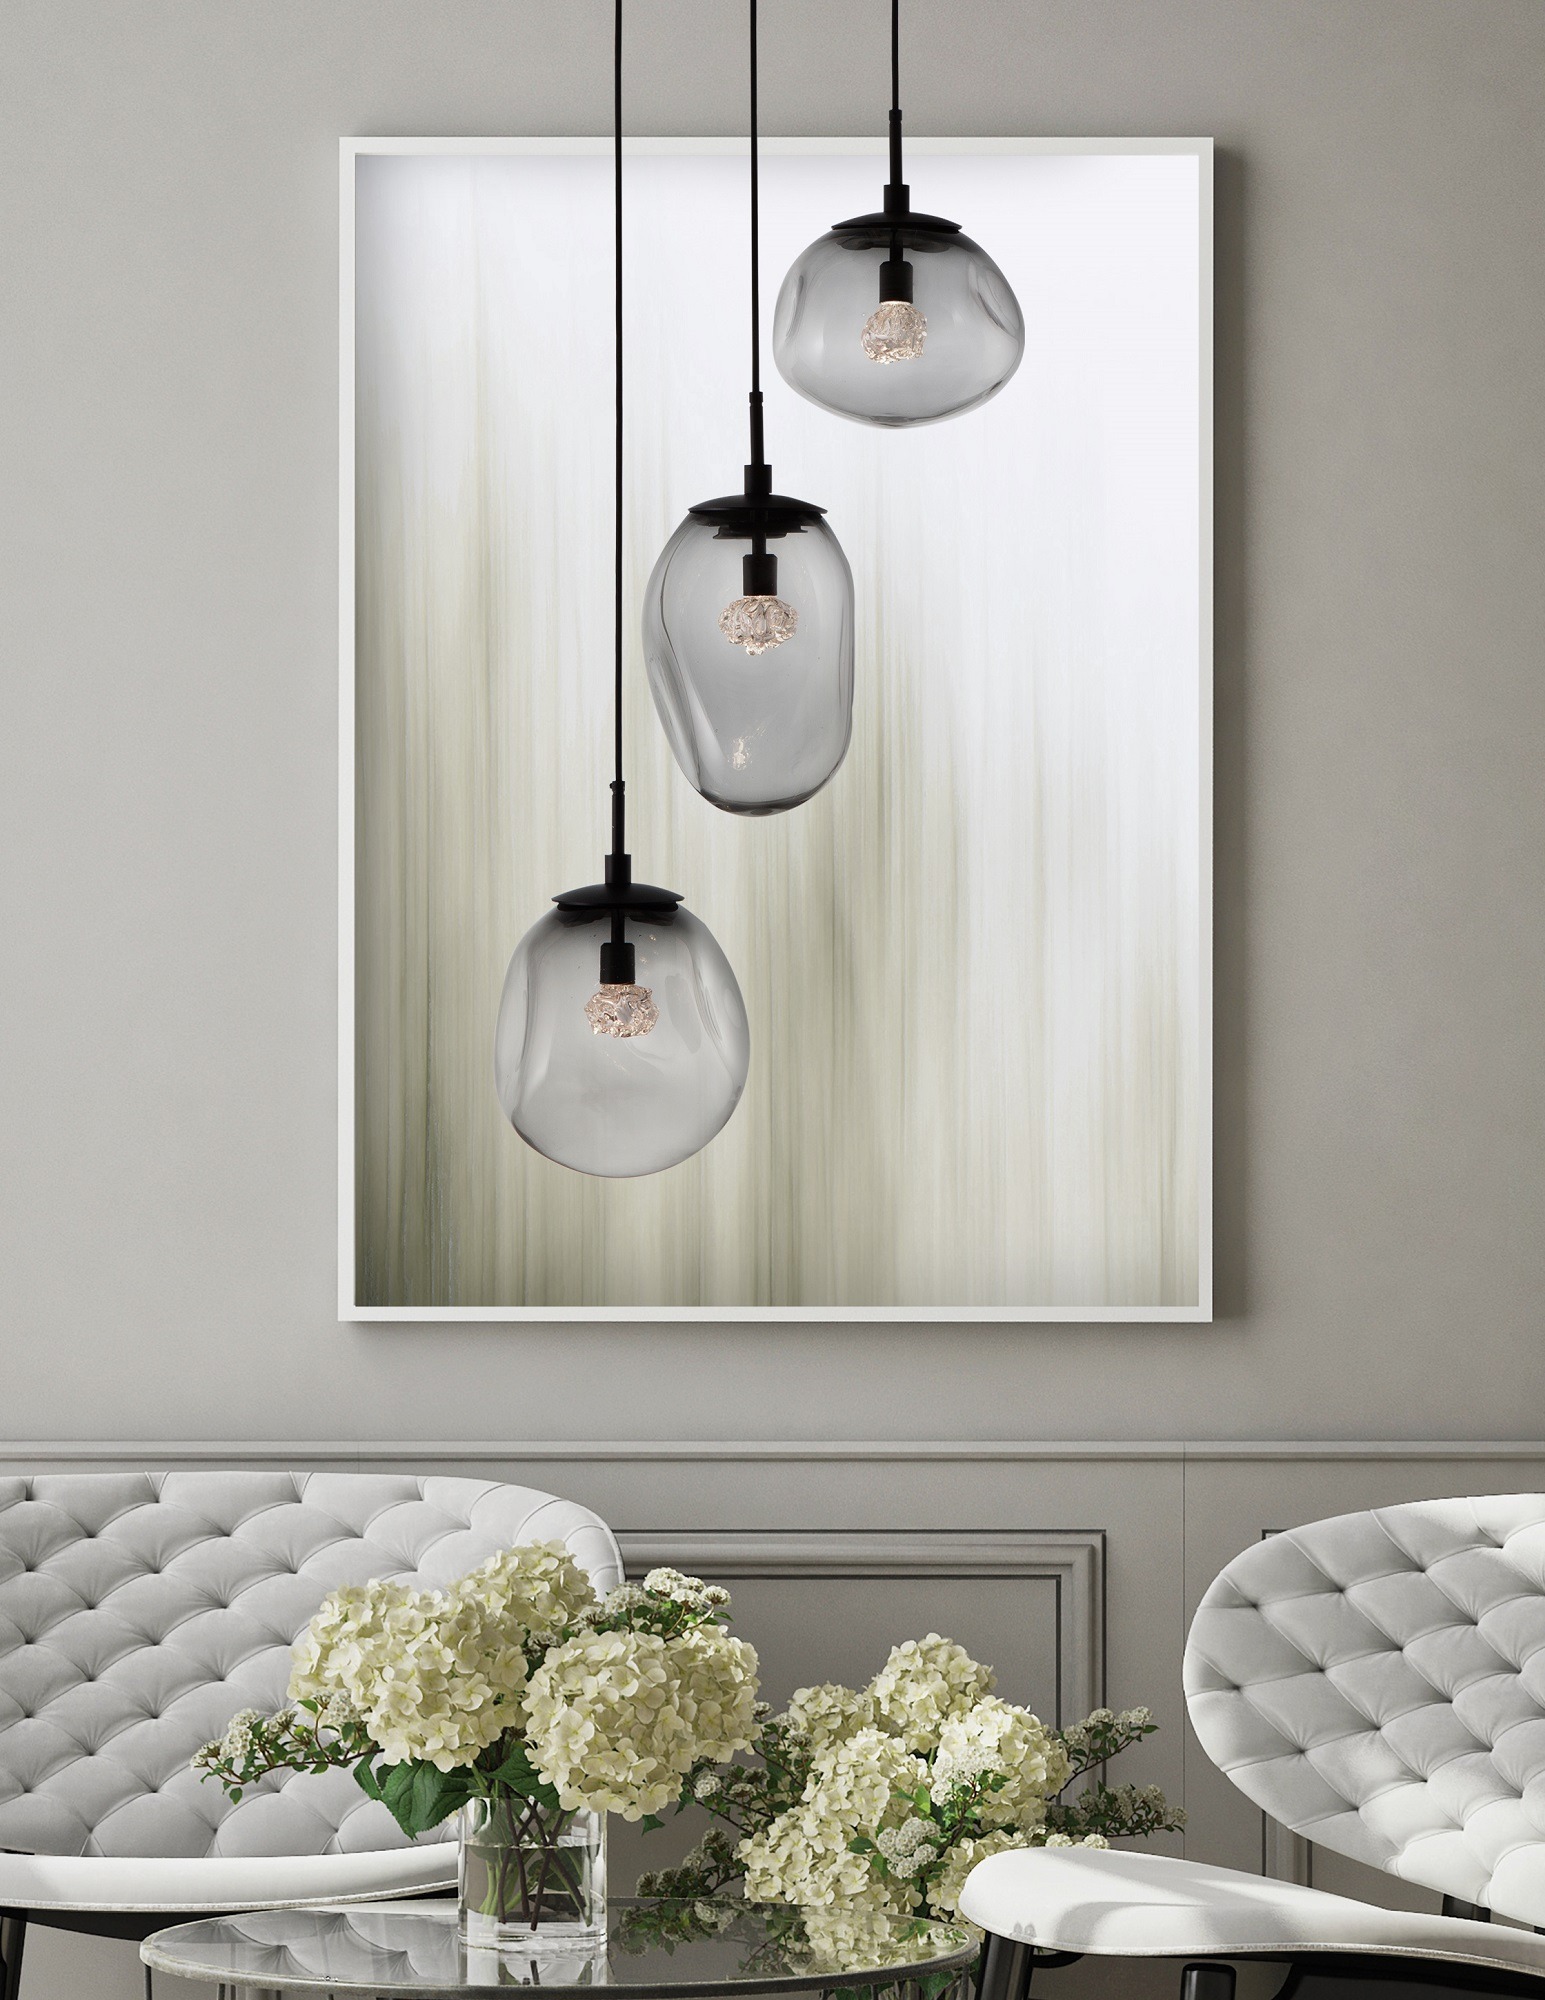 Hammerton Studio's Nebula hanging glass pendant lights featuring both hand blown crystal glass shades and cast crystal glass bulbs